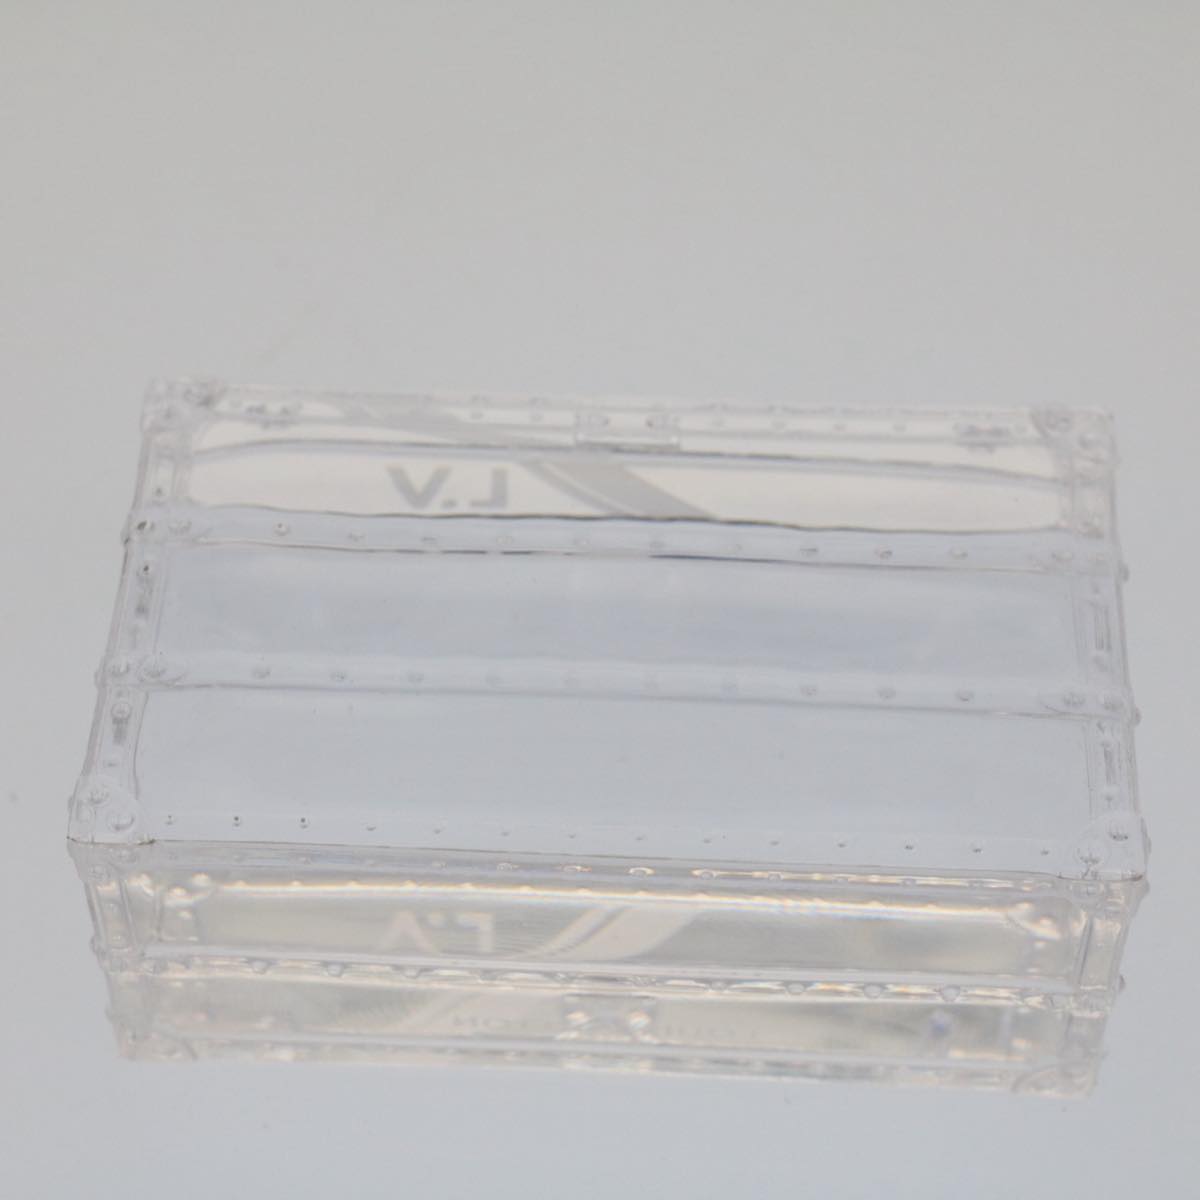 LOUIS VUITTON Paper Weight Clear LV Auth 51071